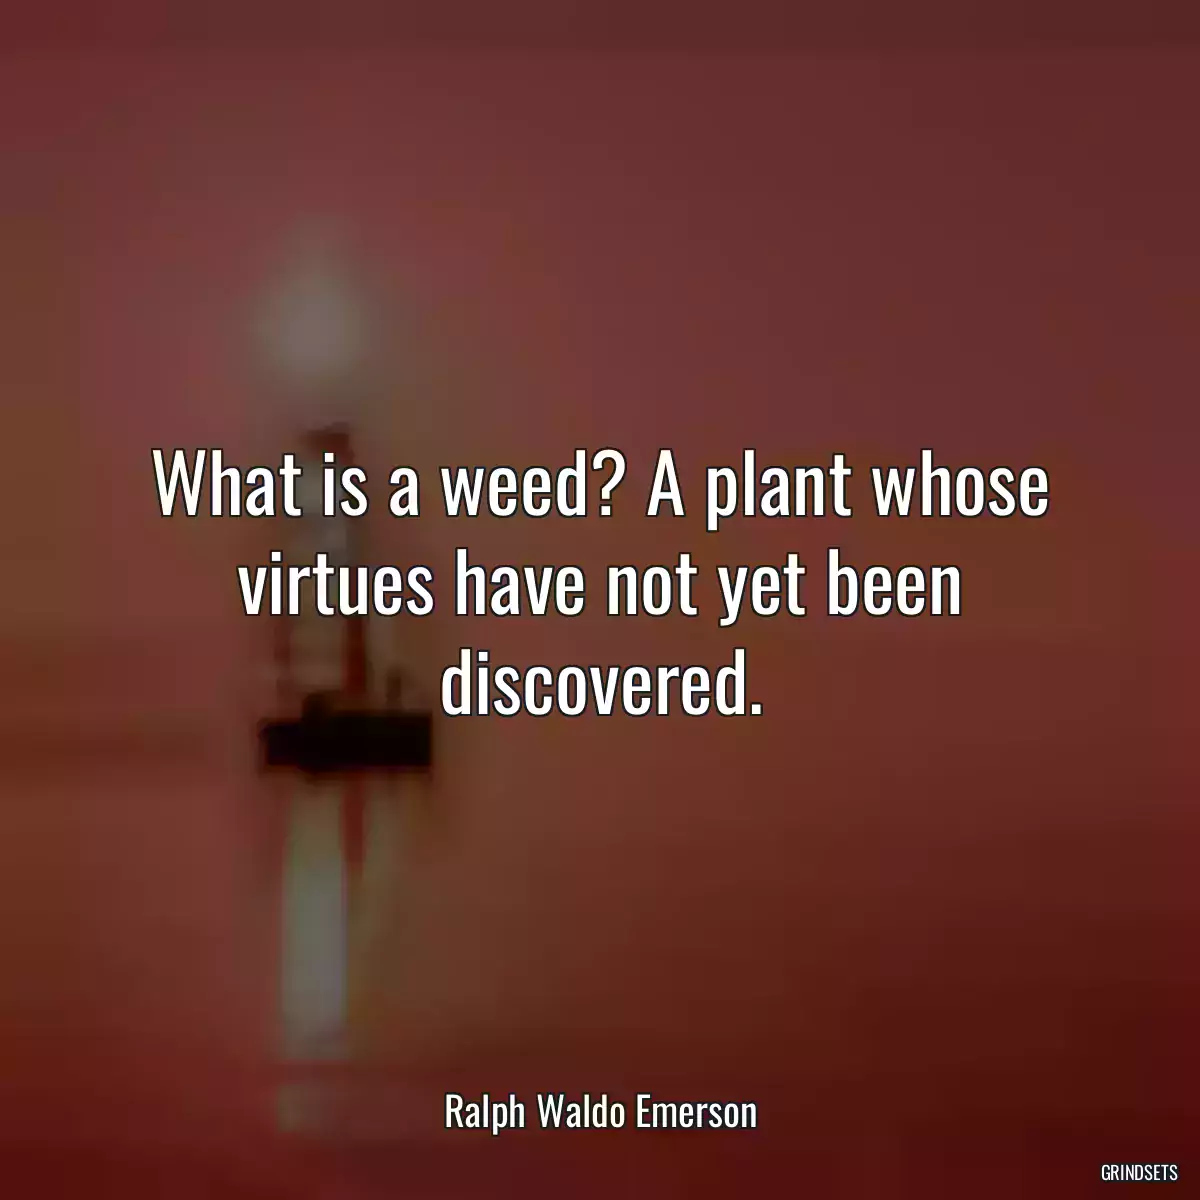 What is a weed? A plant whose virtues have not yet been discovered.